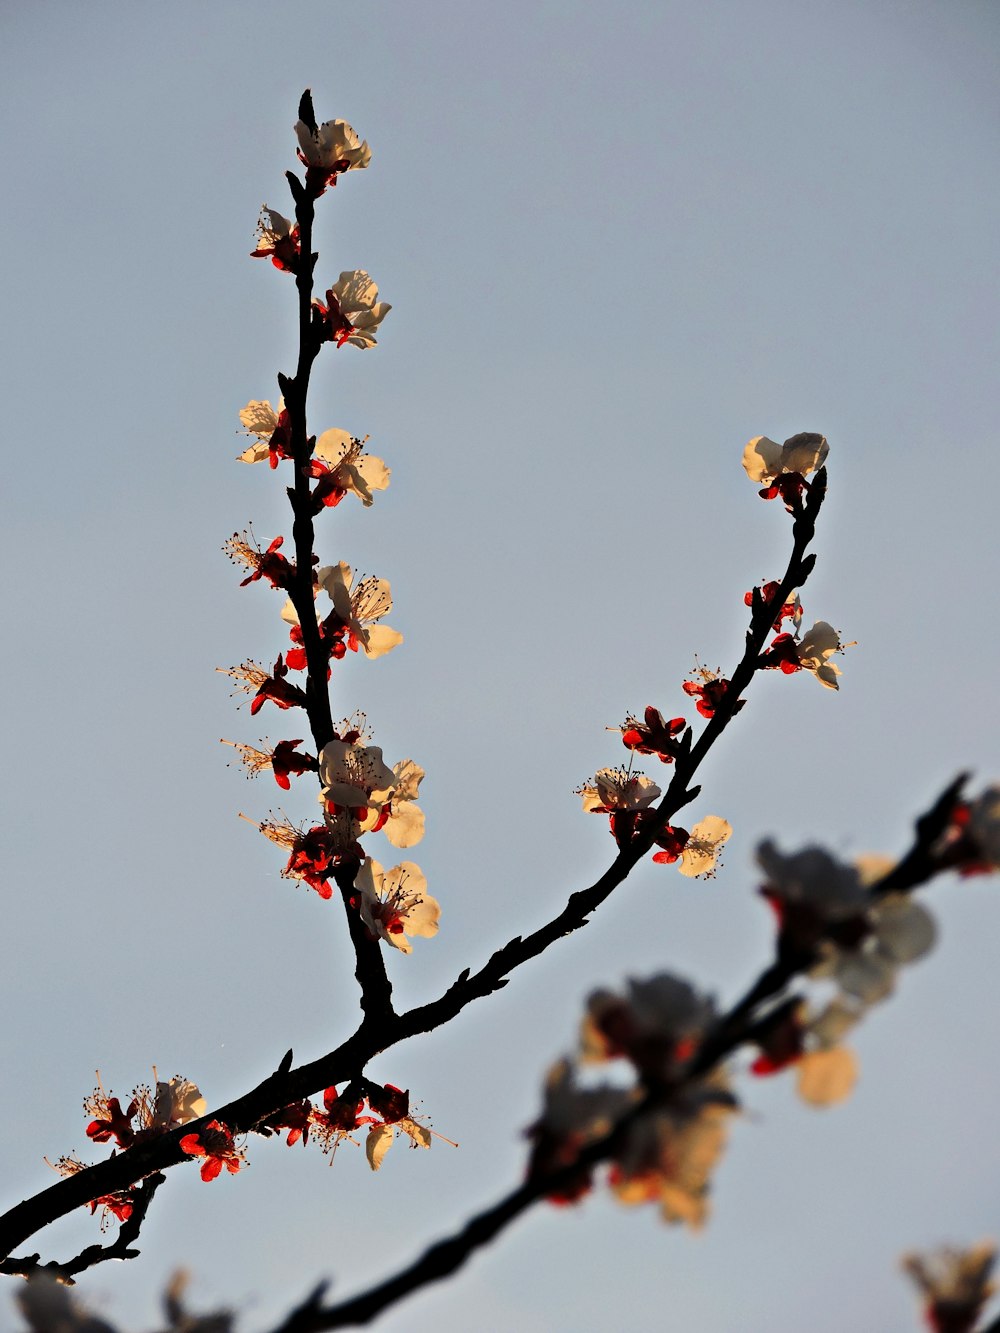 a tree branch with flowers in the foreground and a blue sky in the background